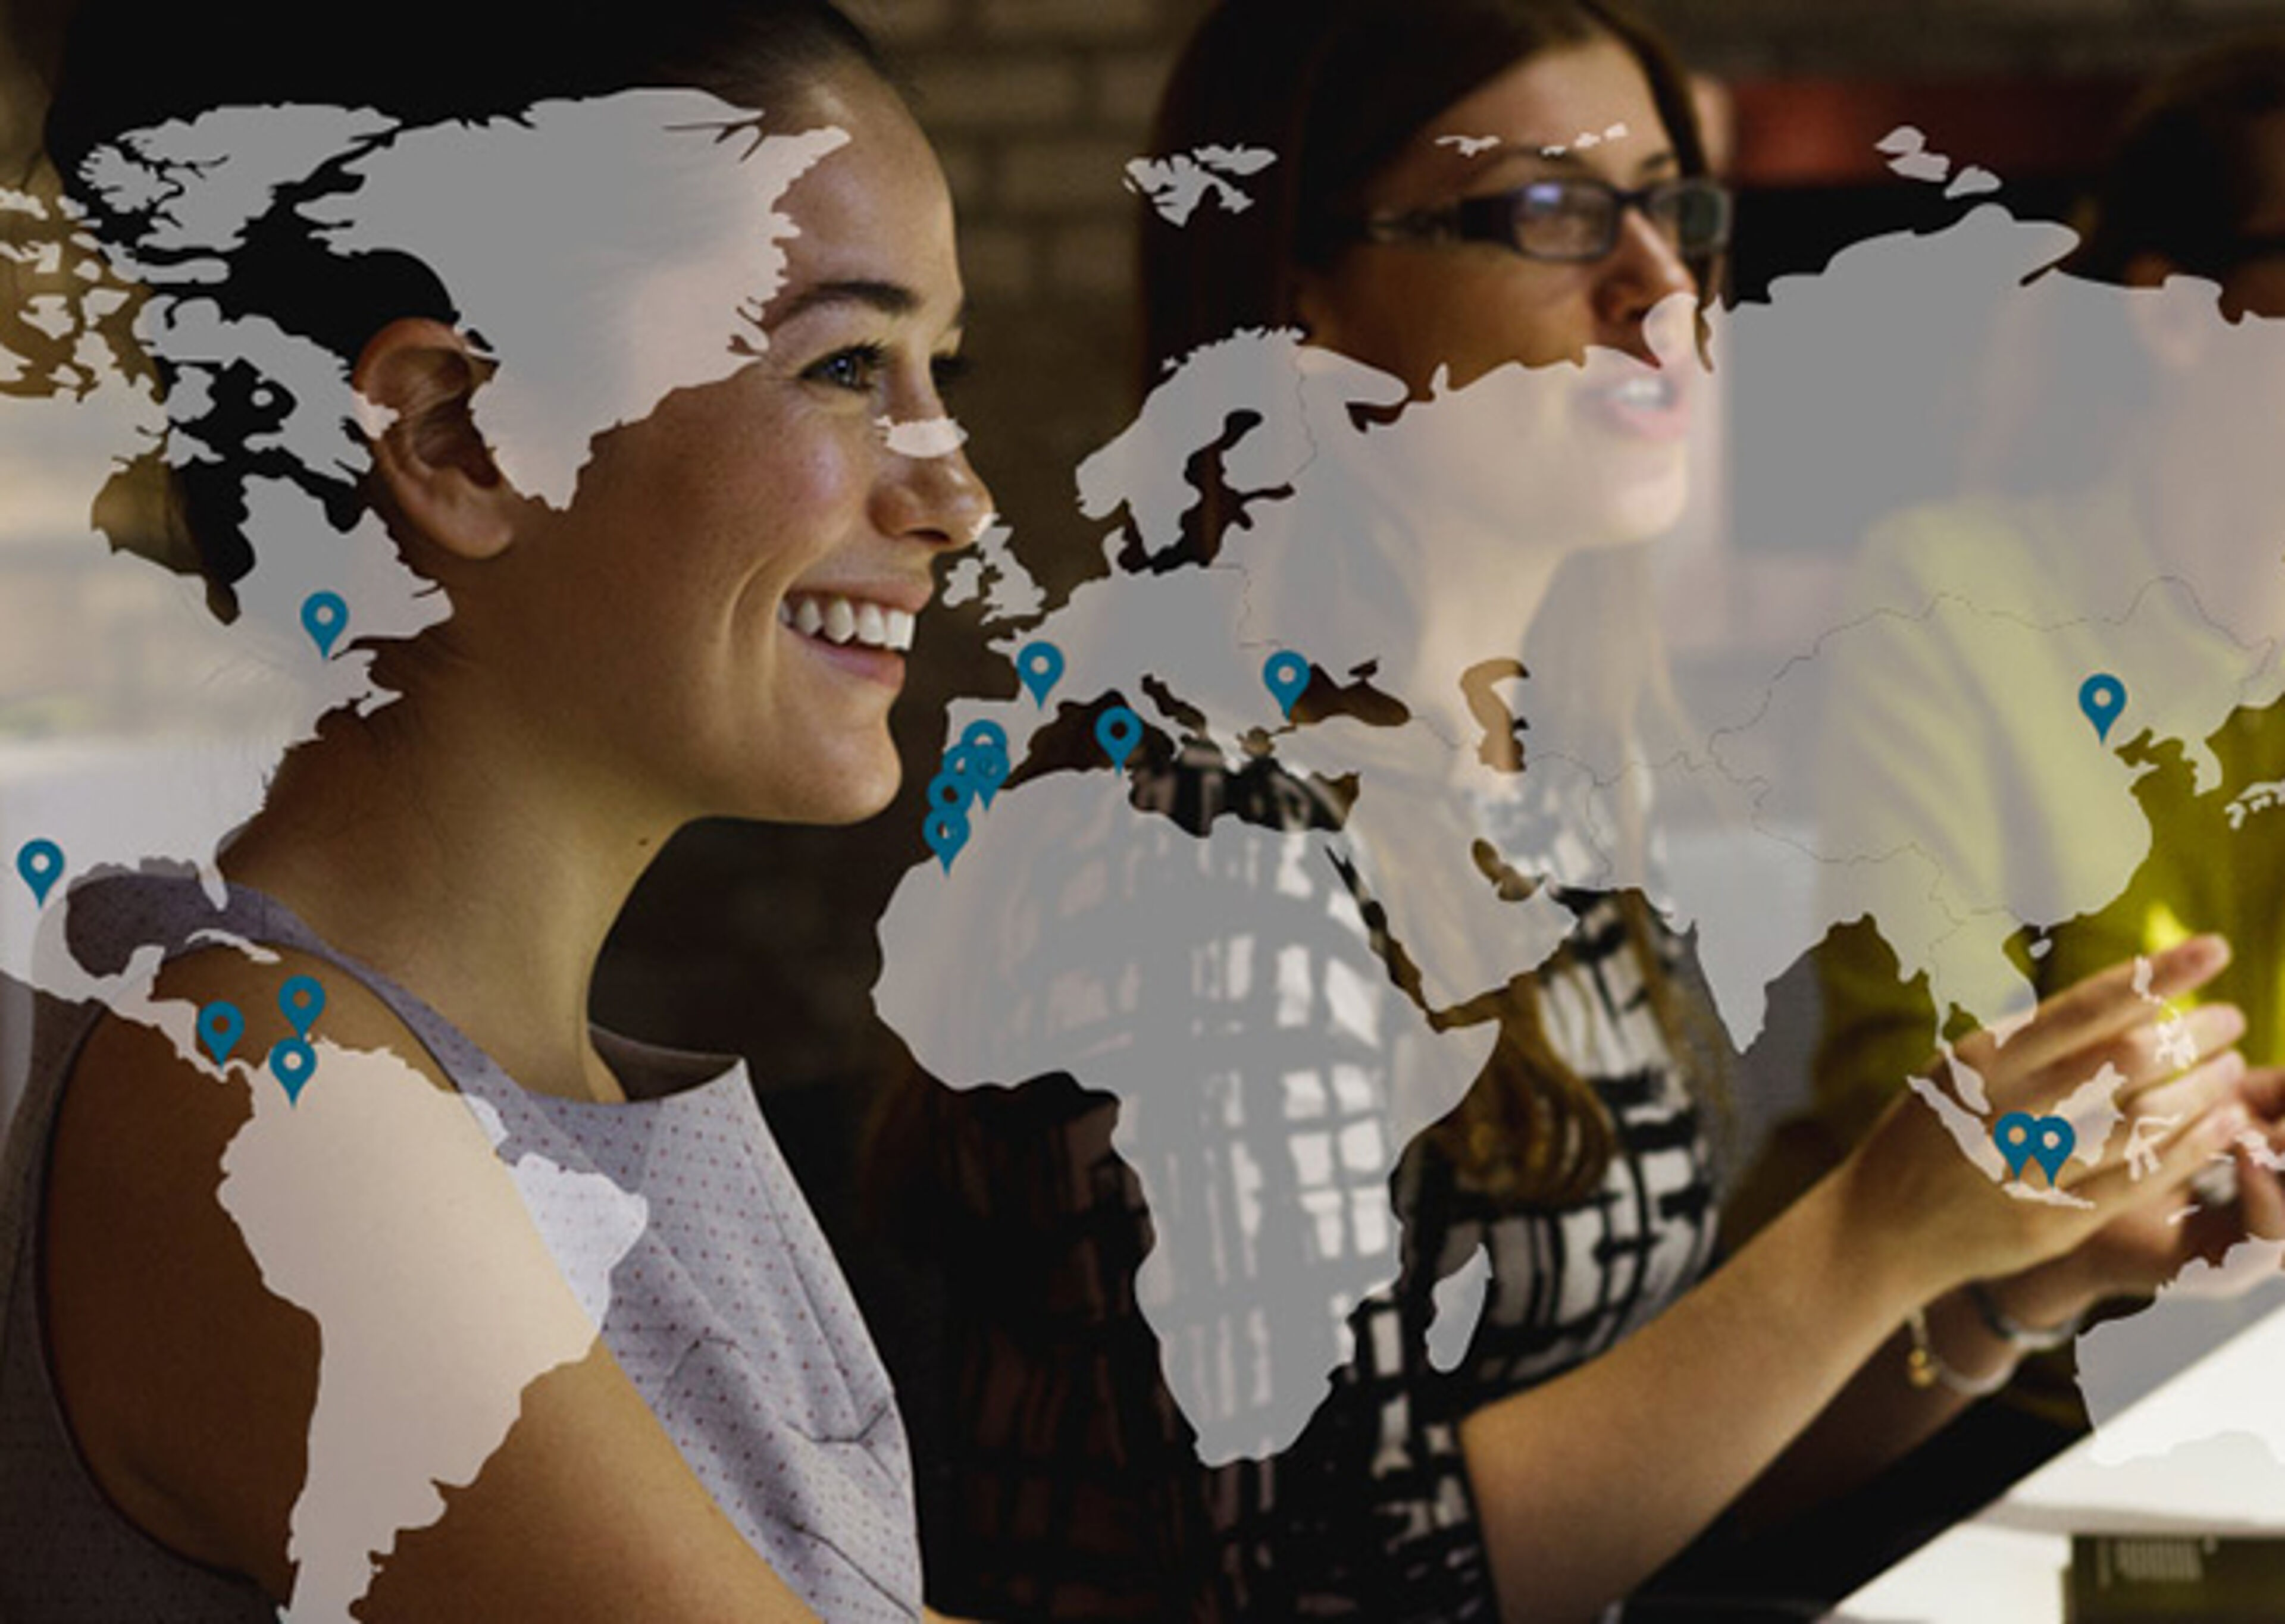 Image overlaying a world map with connection icons on a photo of two smiling women, symbolizing global collaboration.